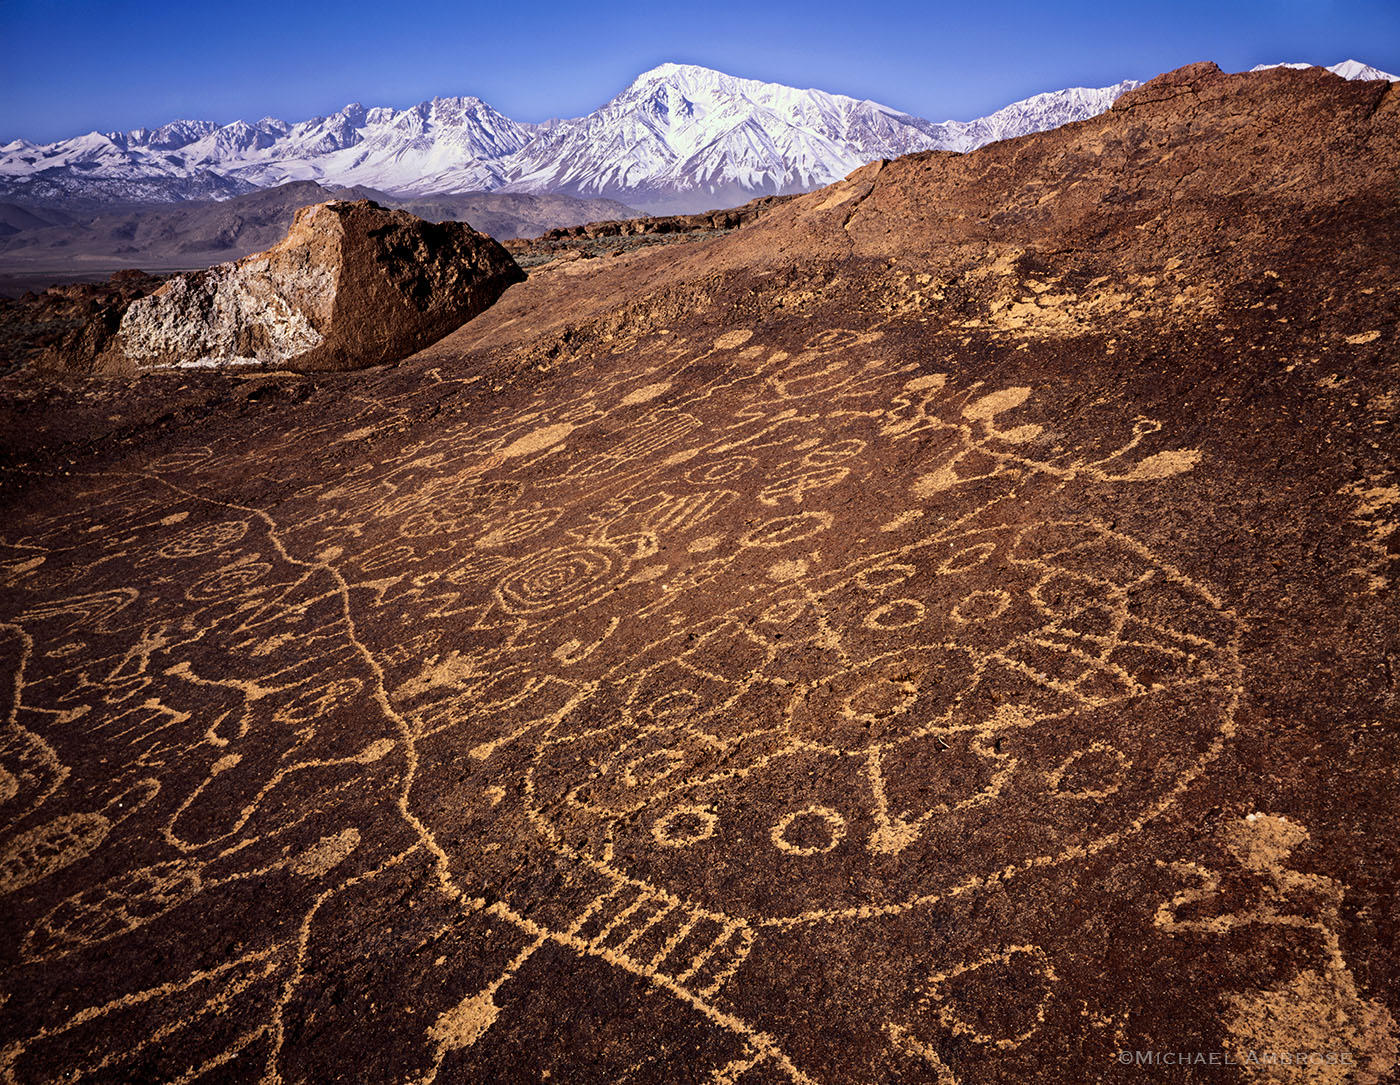 Native American petroglyphs, ancient writing full of culture and beauty, beneath the backdrop of the snow-capped Eastern Sierra Nevada range.